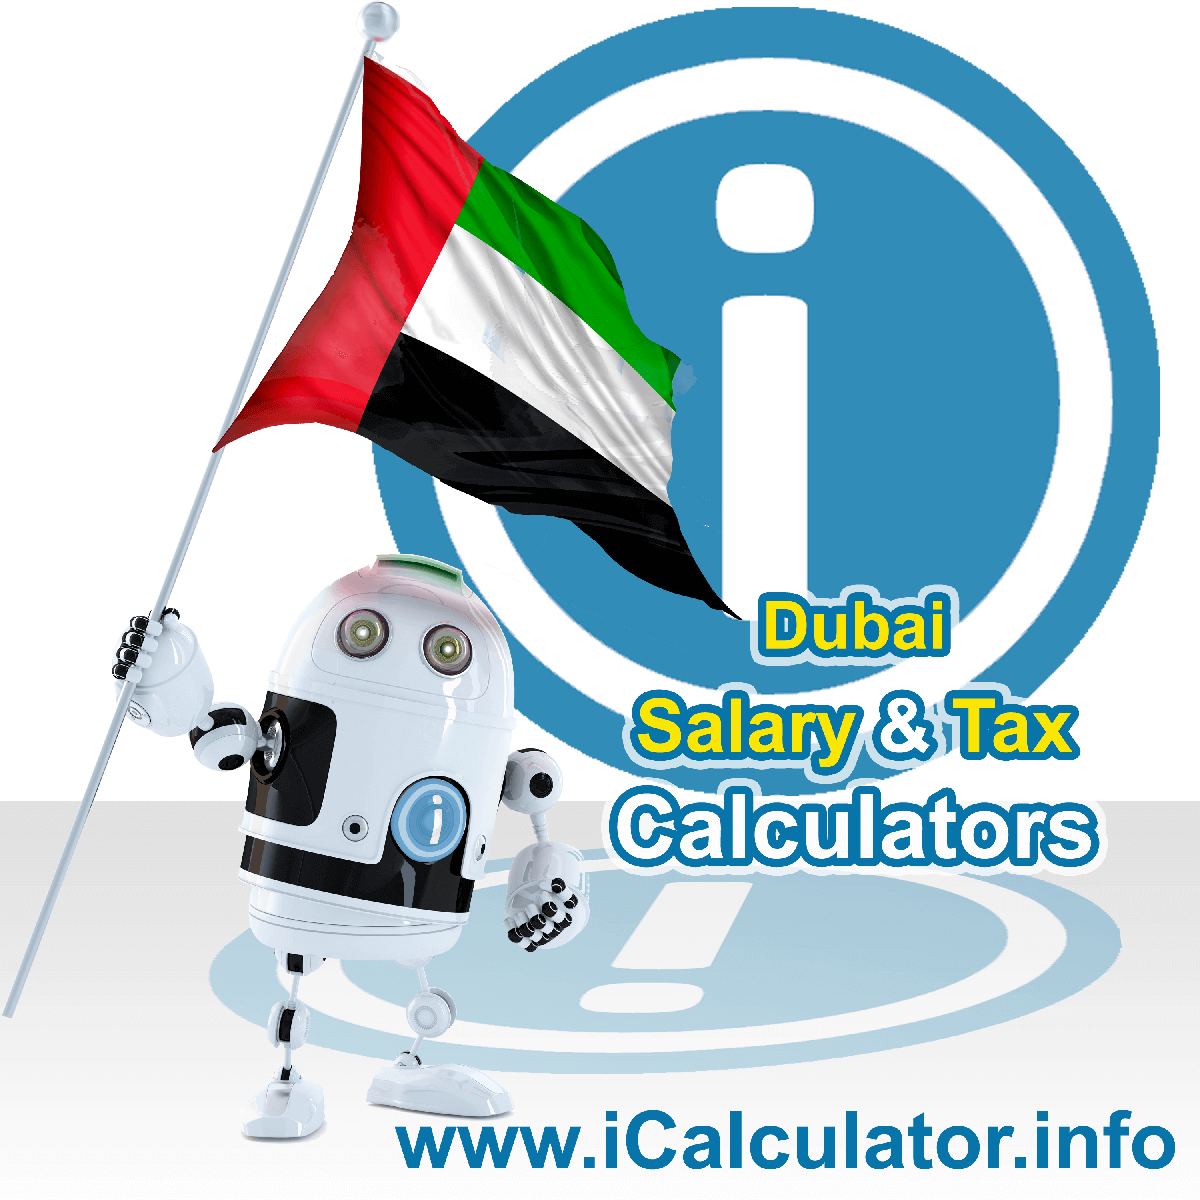 Dubai Wage Calculator. This image shows the Dubai flag and information relating to the tax formula for the Dubai Tax Calculator